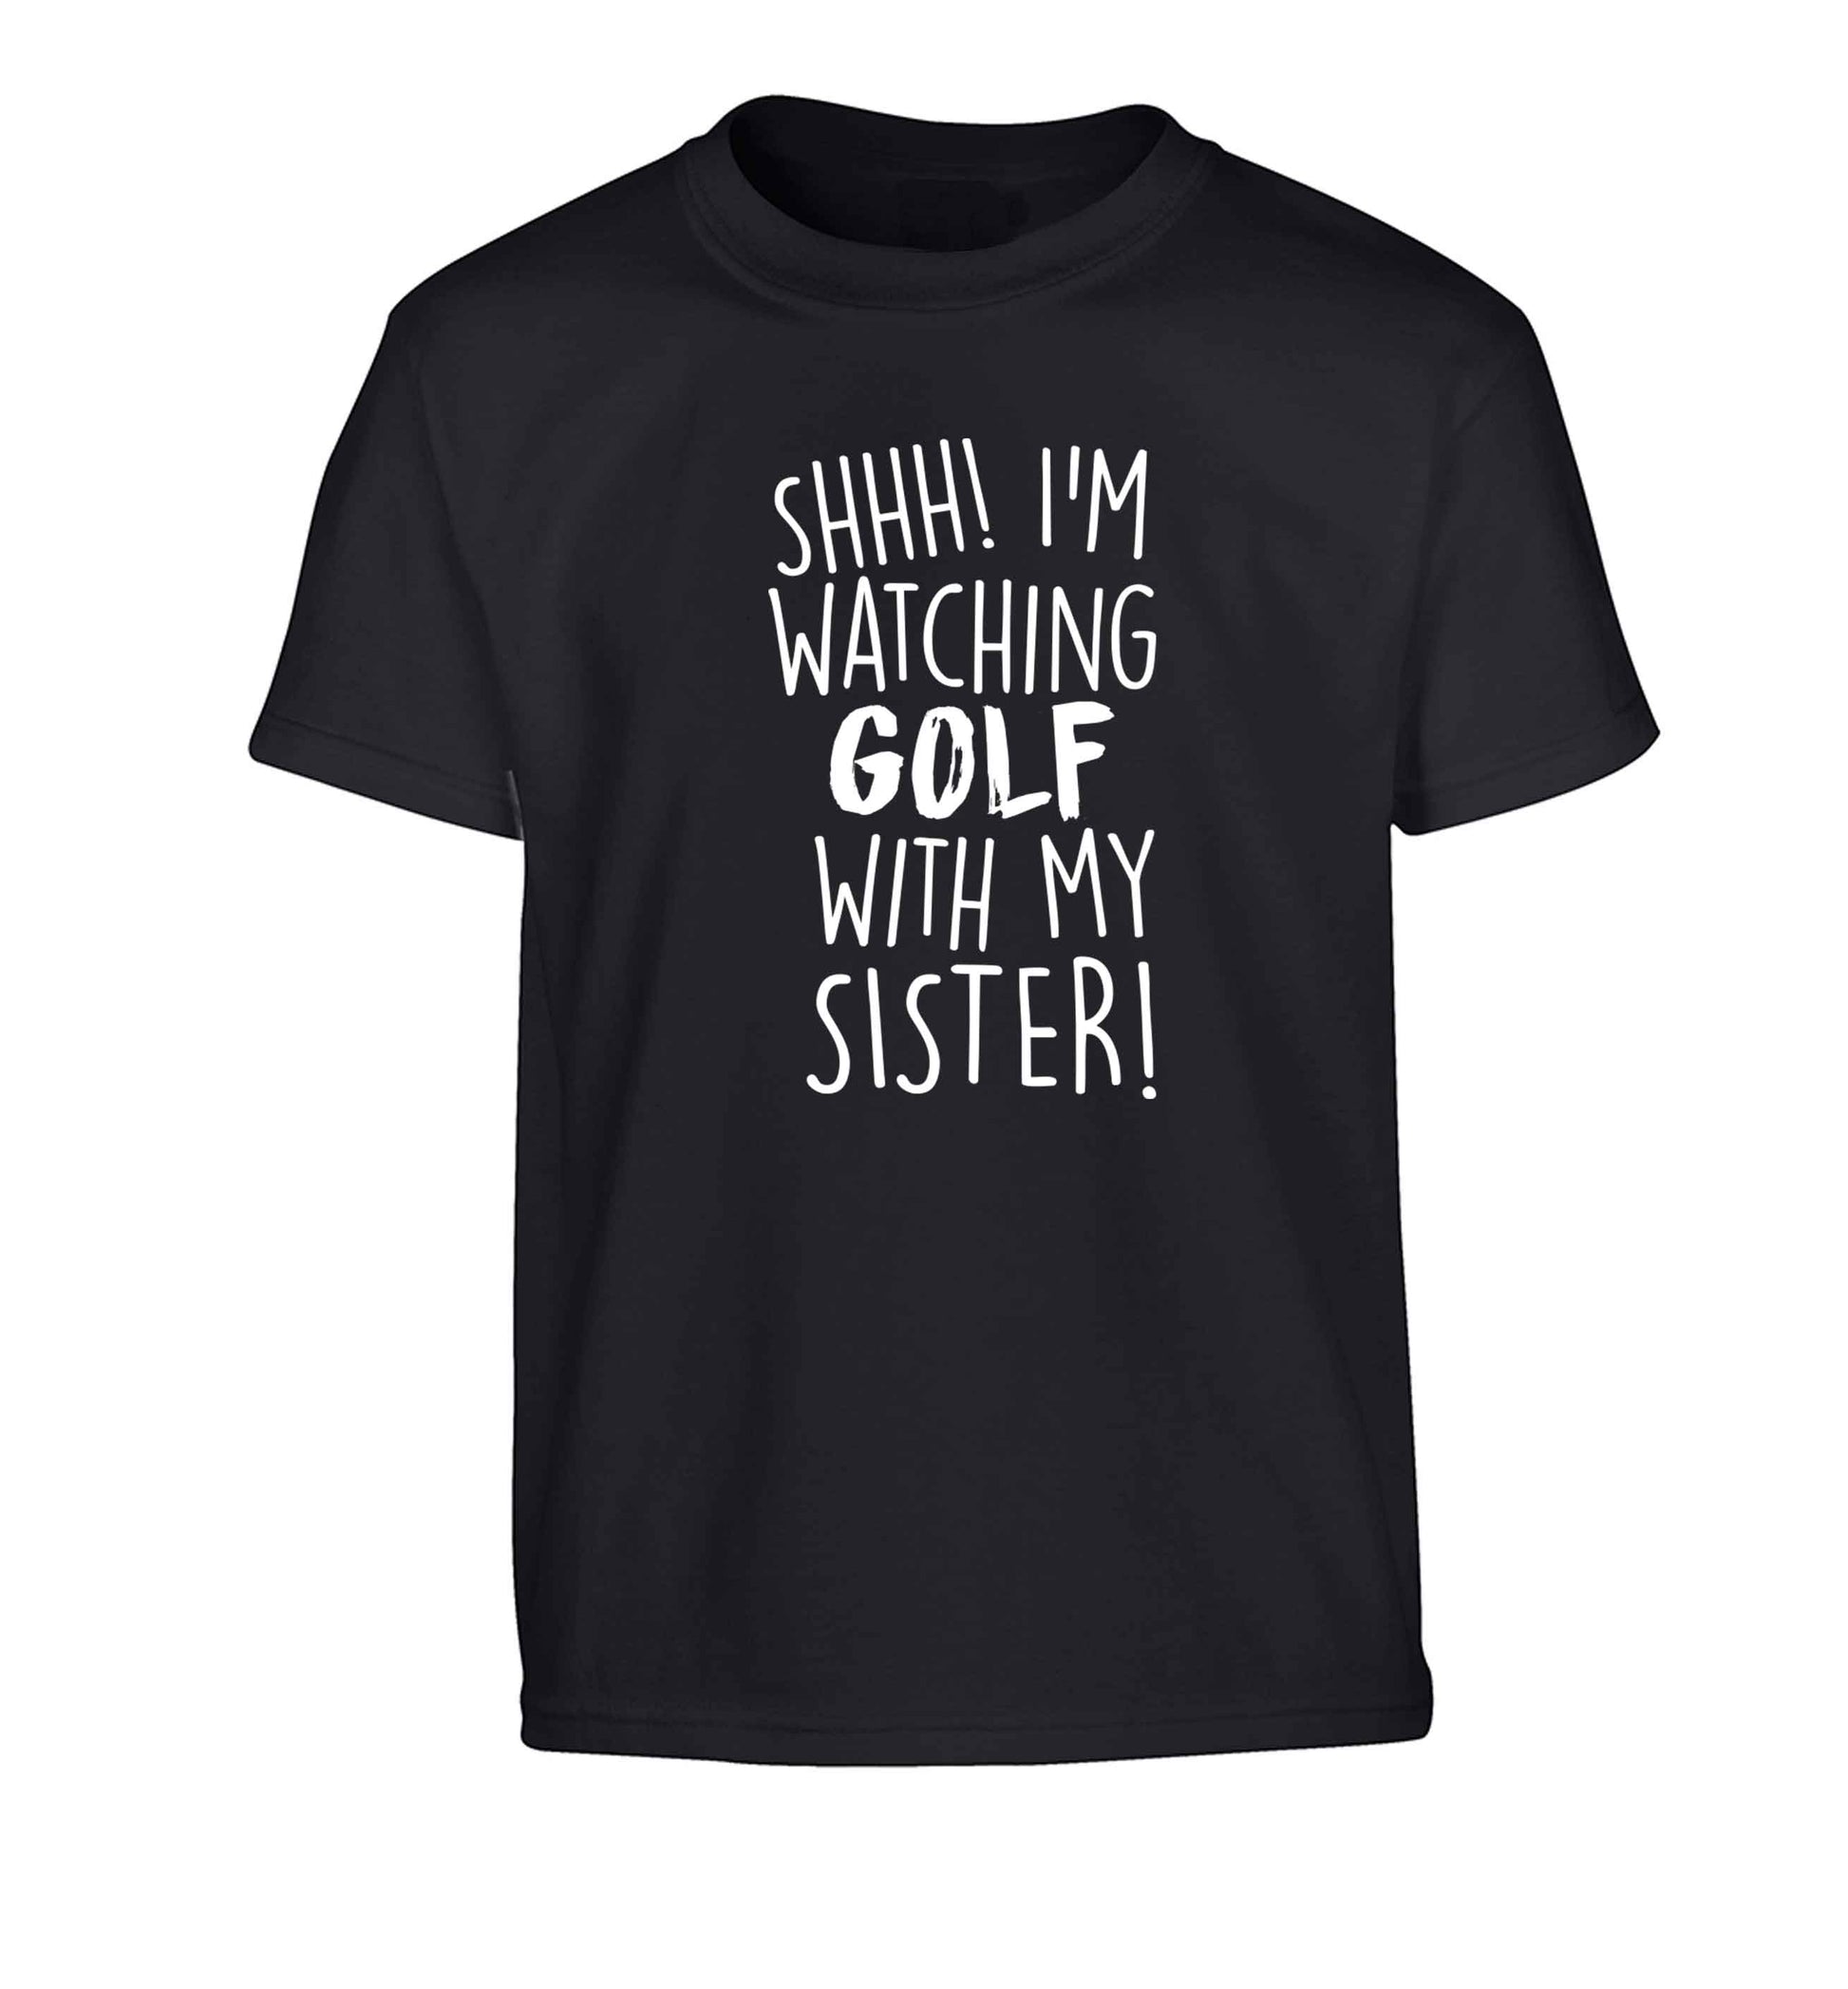 Shh I'm watching golf with my sister Children's black Tshirt 12-13 Years